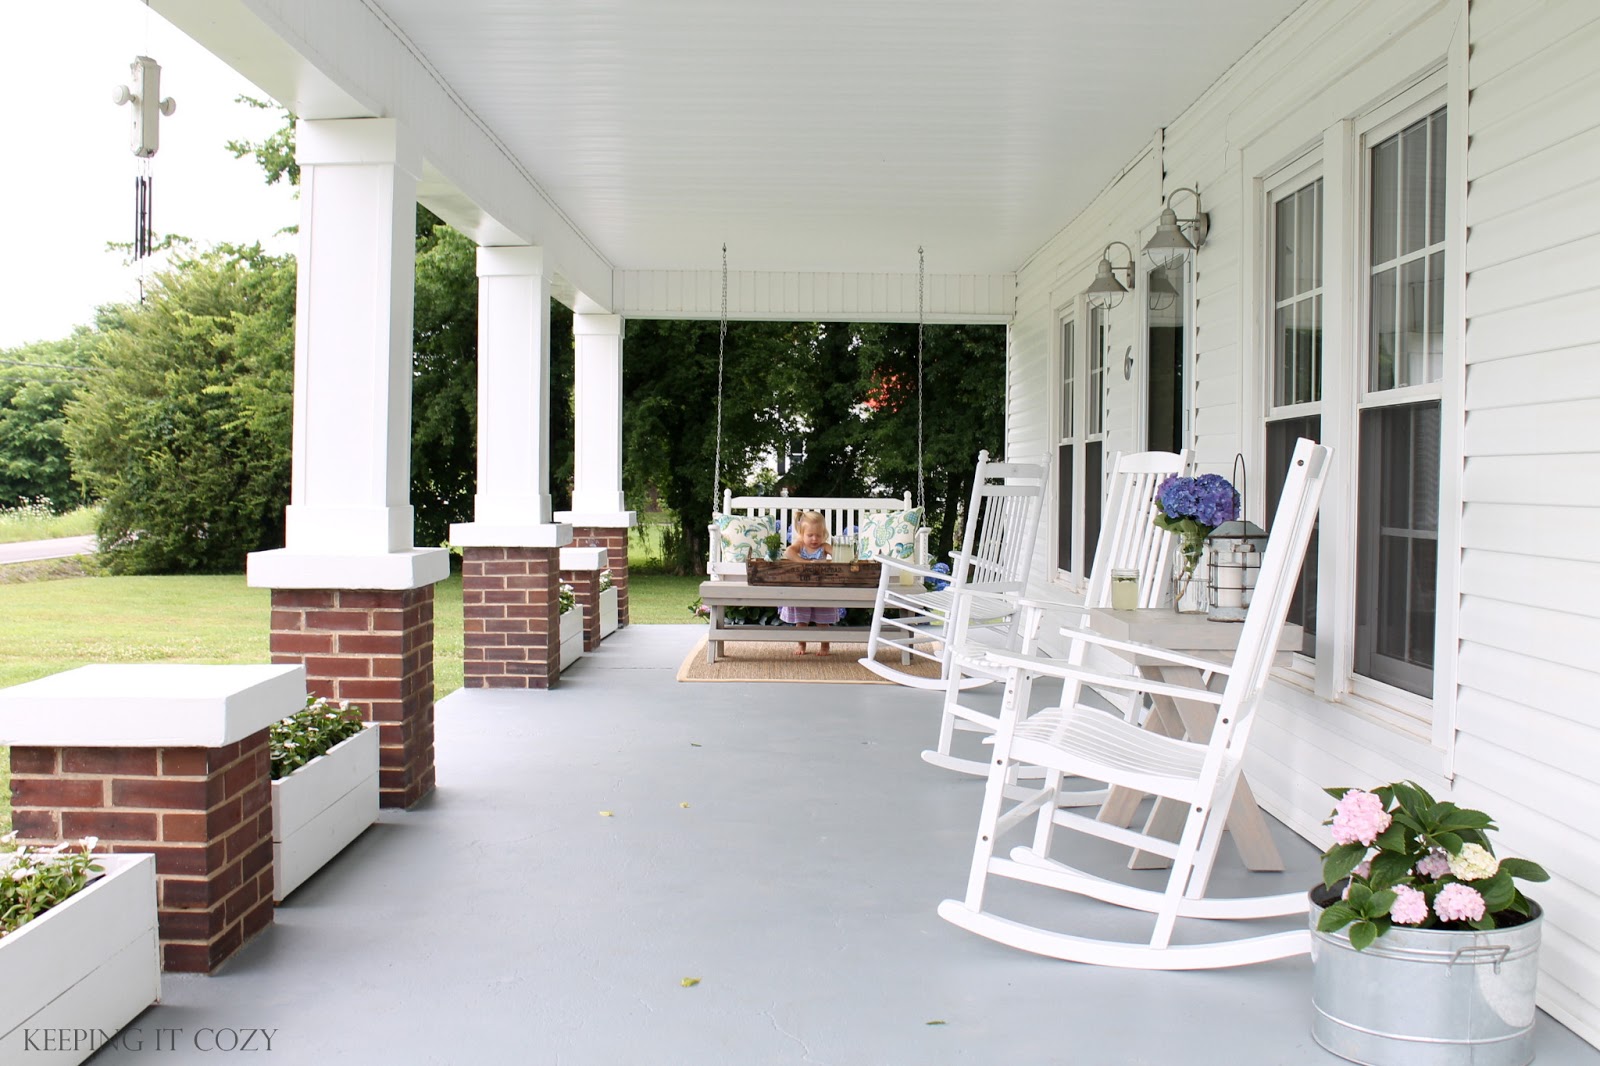 Keeping It Cozy: The Front Porch